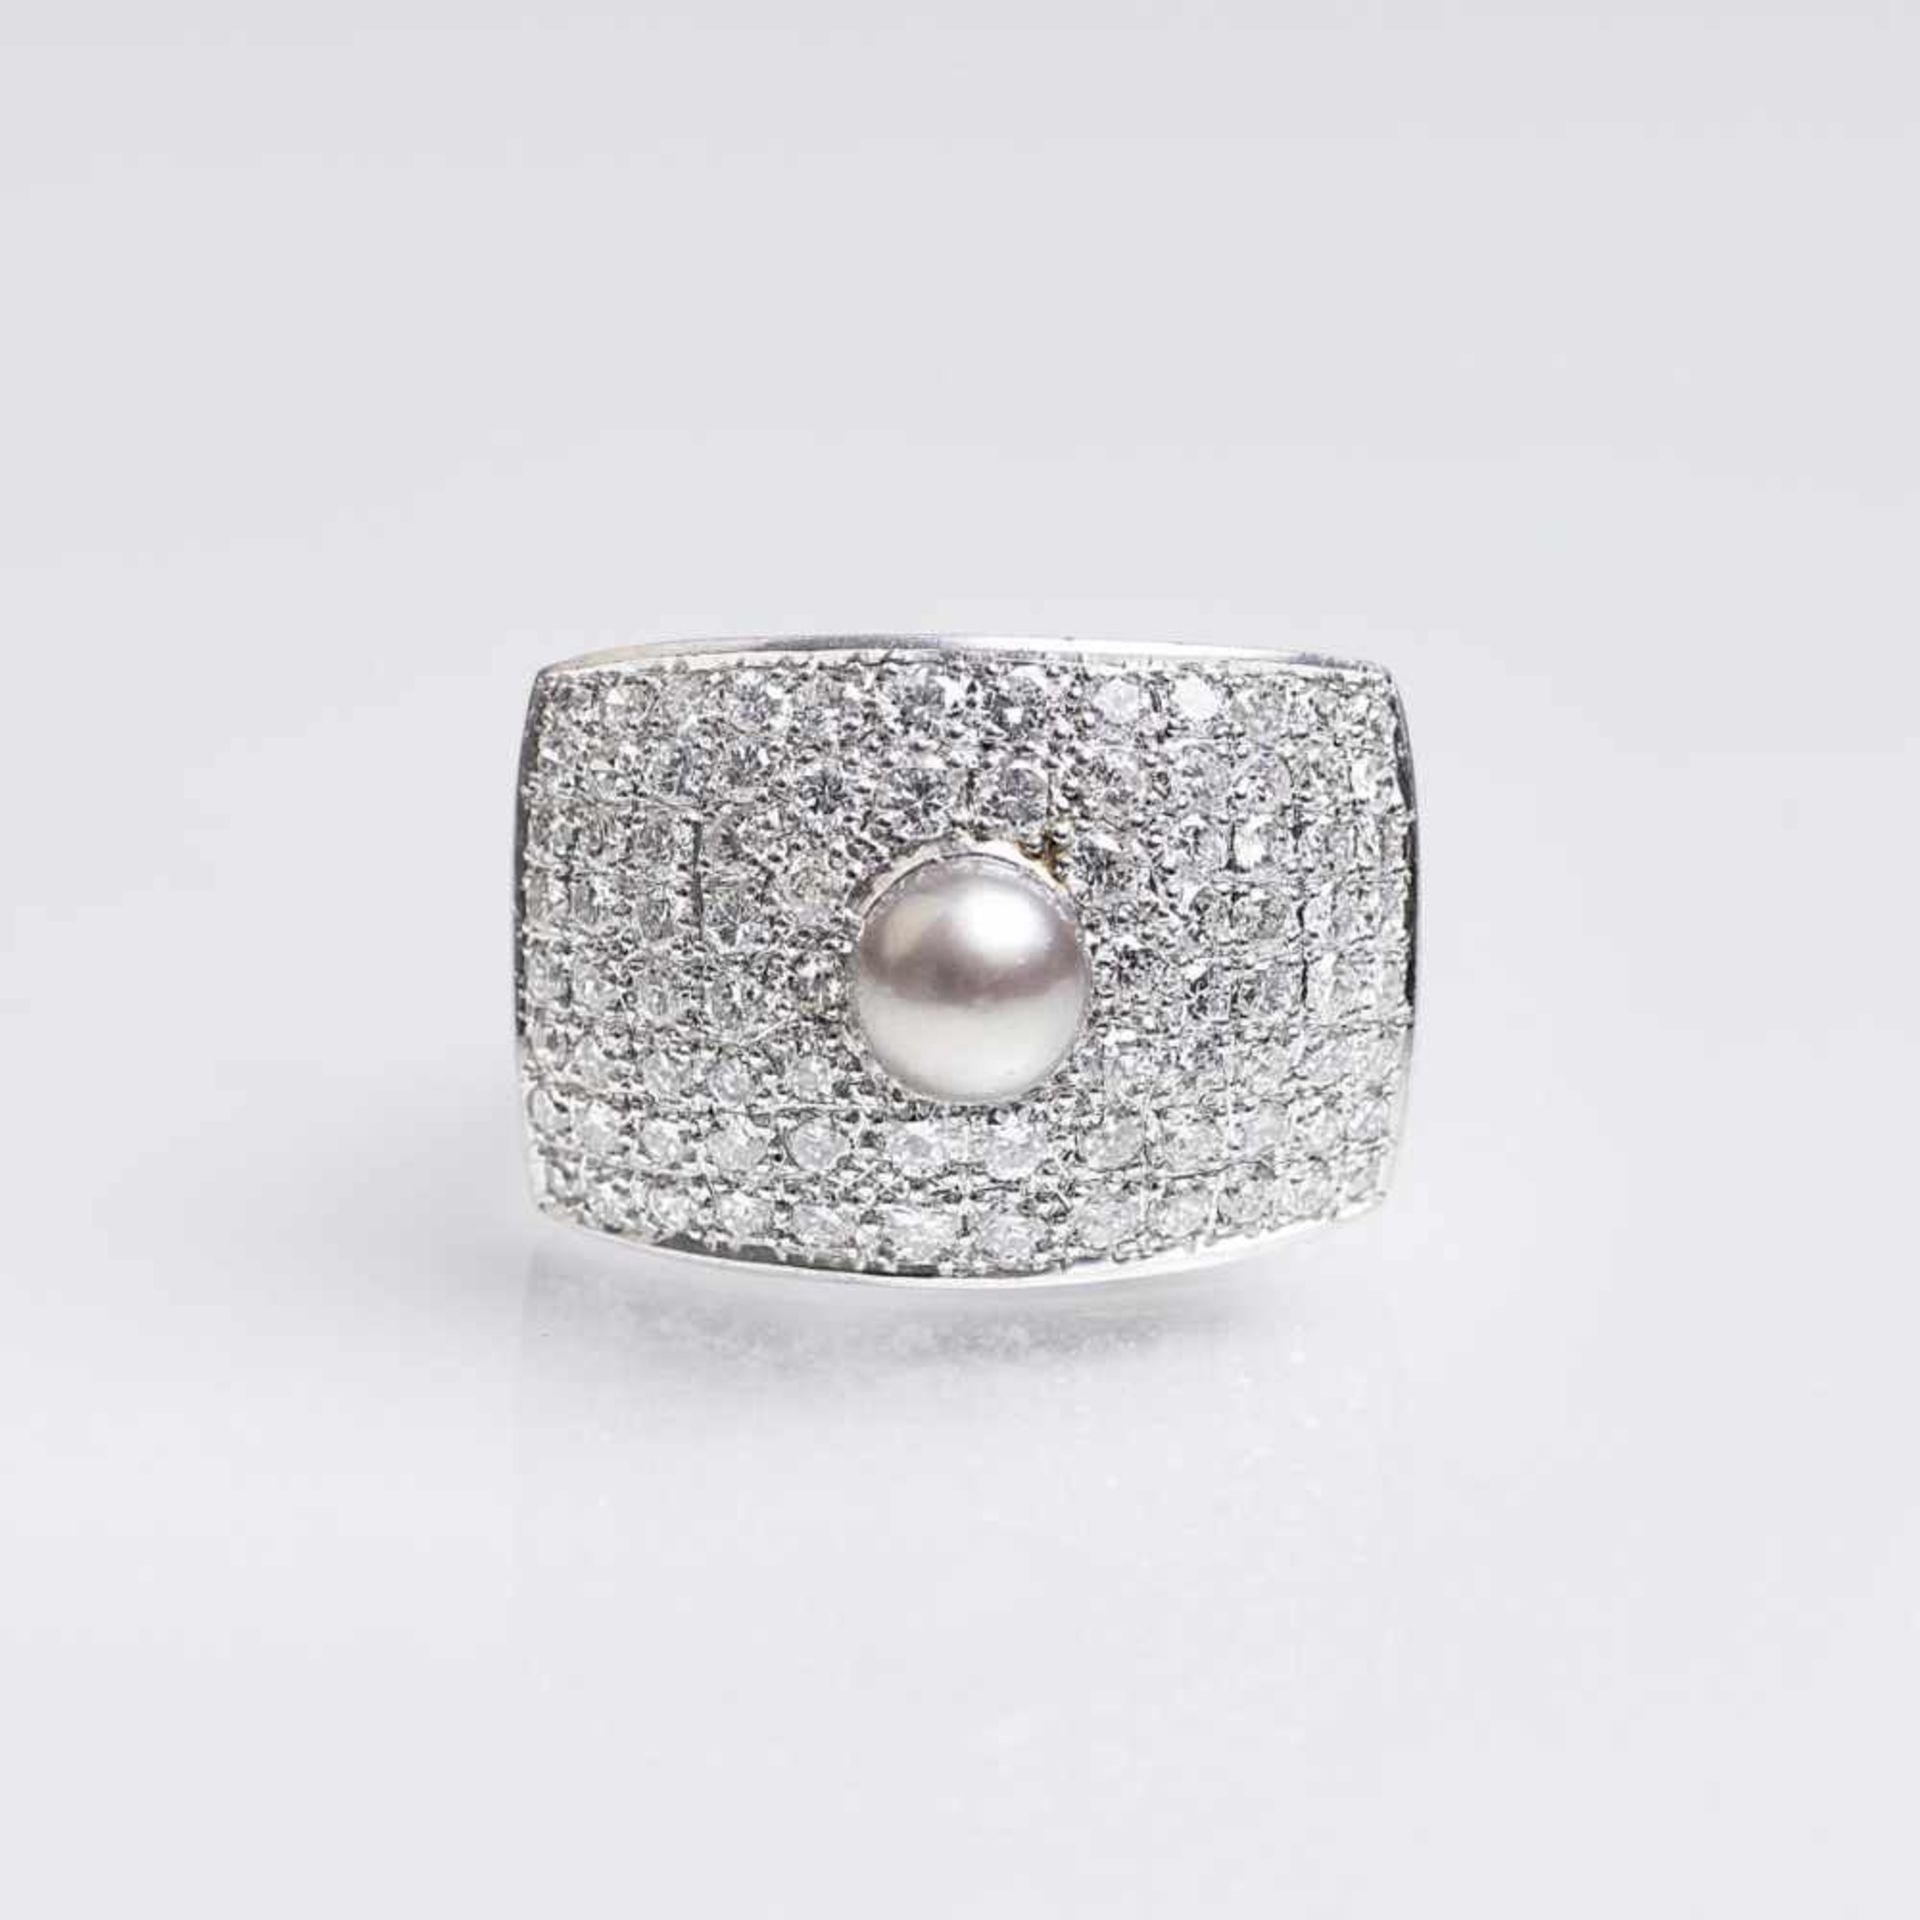 A Diamond Ring with PearlPlatinum ringtop, ring 18 kt. white gold. In pavé settings 86 diam. in